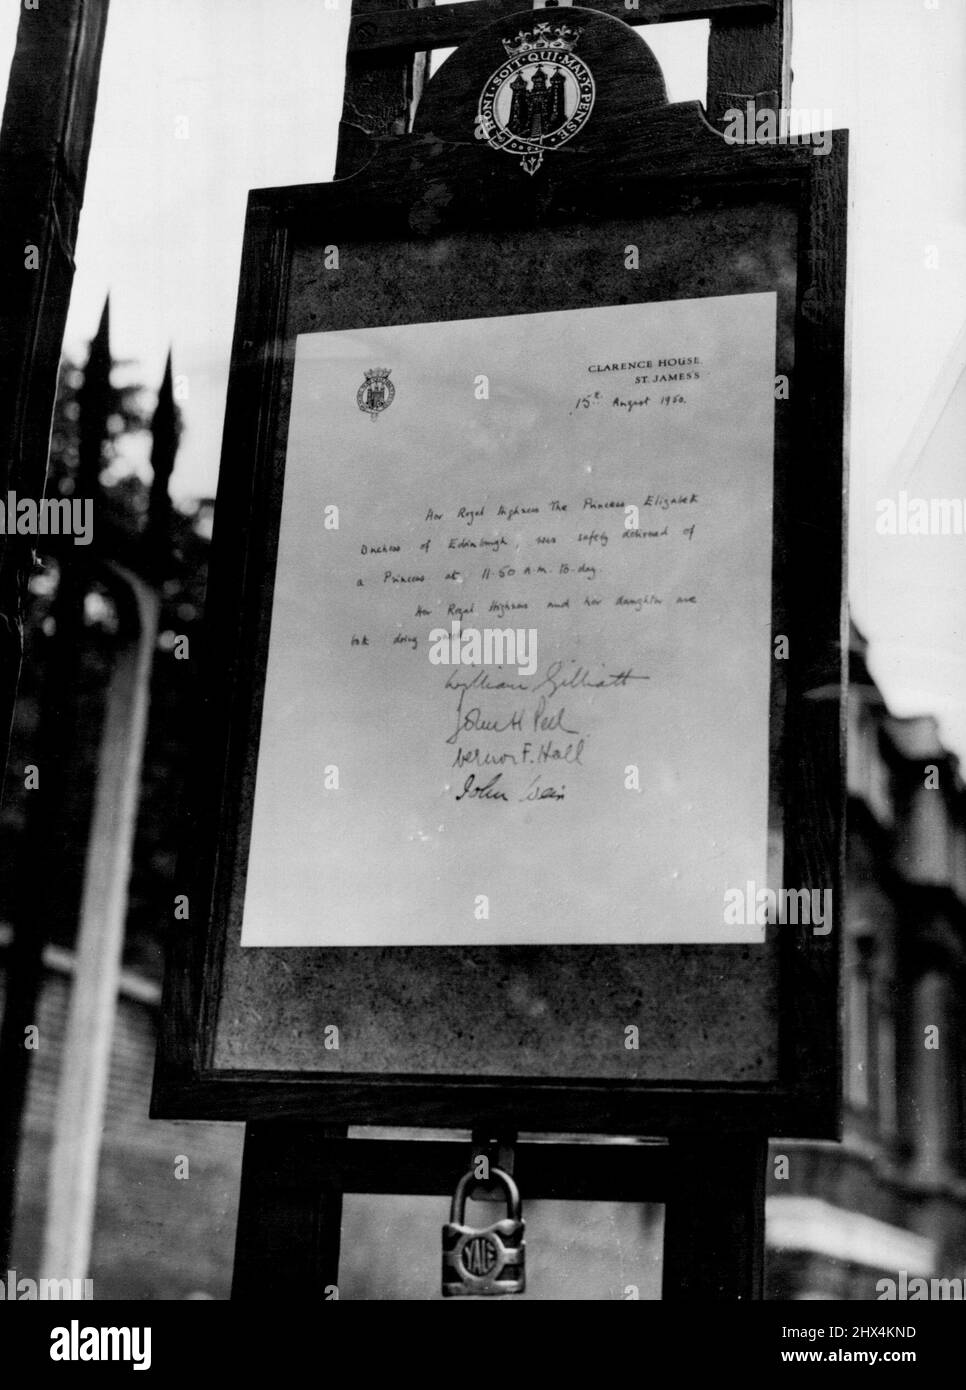 Records Birth Of Princess - This notice, pinned to the gates of Clarence House, London, Announces the birth of a daughter to Princess Elizabeth Aug. 15. Headed 'Clarence House, St. Jame's,' and dated 15th August 1950, it reads 'Her Royal Highness the Princess Elizabeth, was safely delivered of a Princess at 11.50 AM (British Time) today. Her Royal highness and her daughter are both doing well'. It is signed, from top to bottom, by Sir William Gilliatt, The Princess's Gynaecologist: John H. Peel, Vernon F. Hall and Sir John Weir, The Royal Family's physician. The baby was the first Royal child Stock Photo